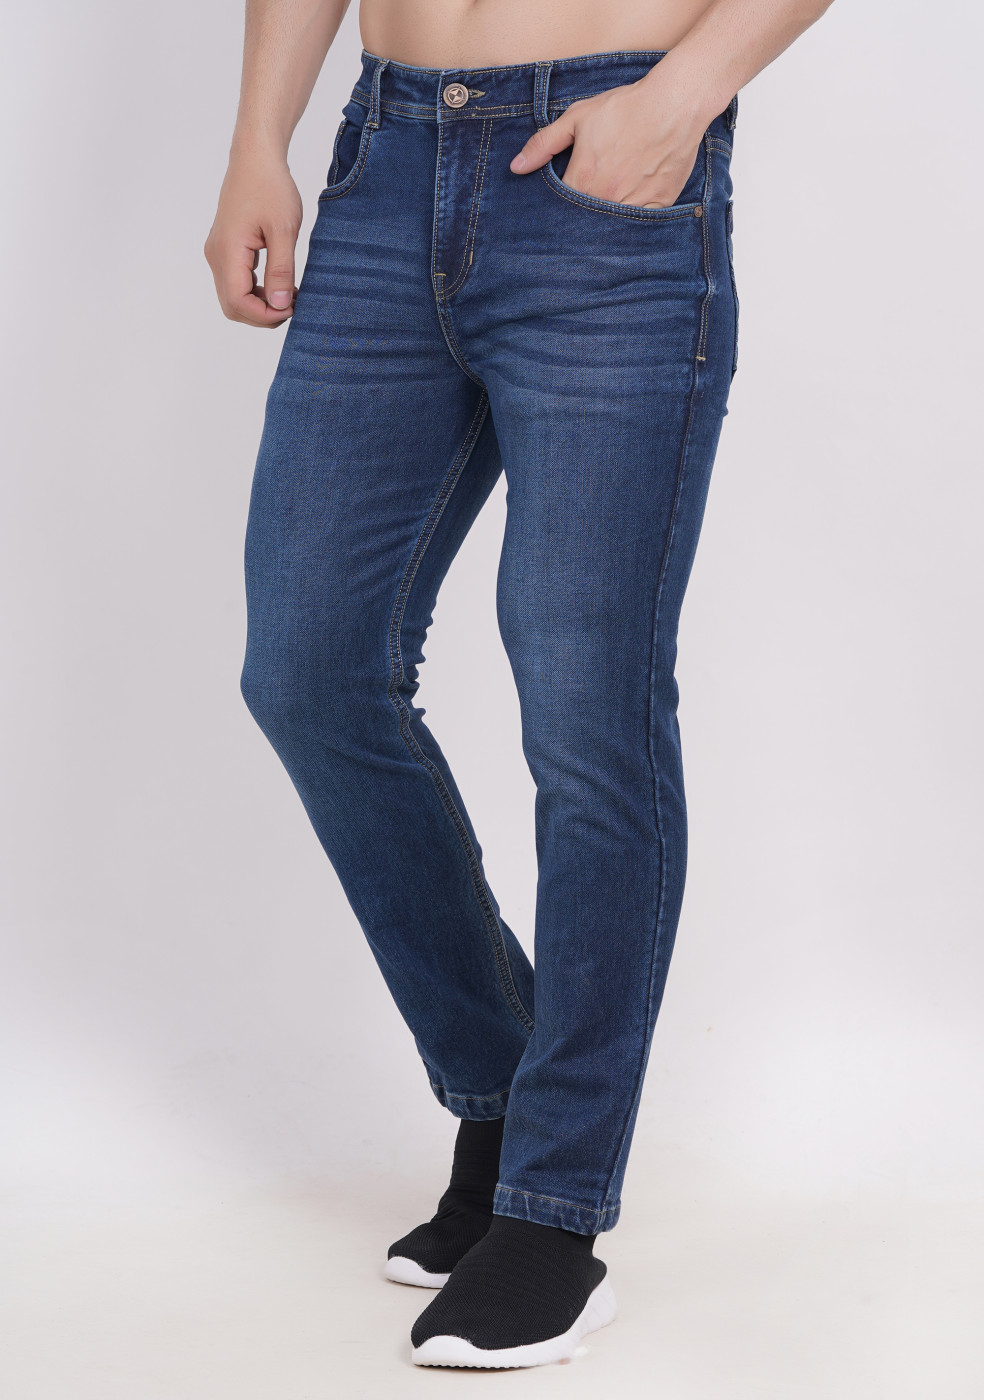 Jeans pant for Men